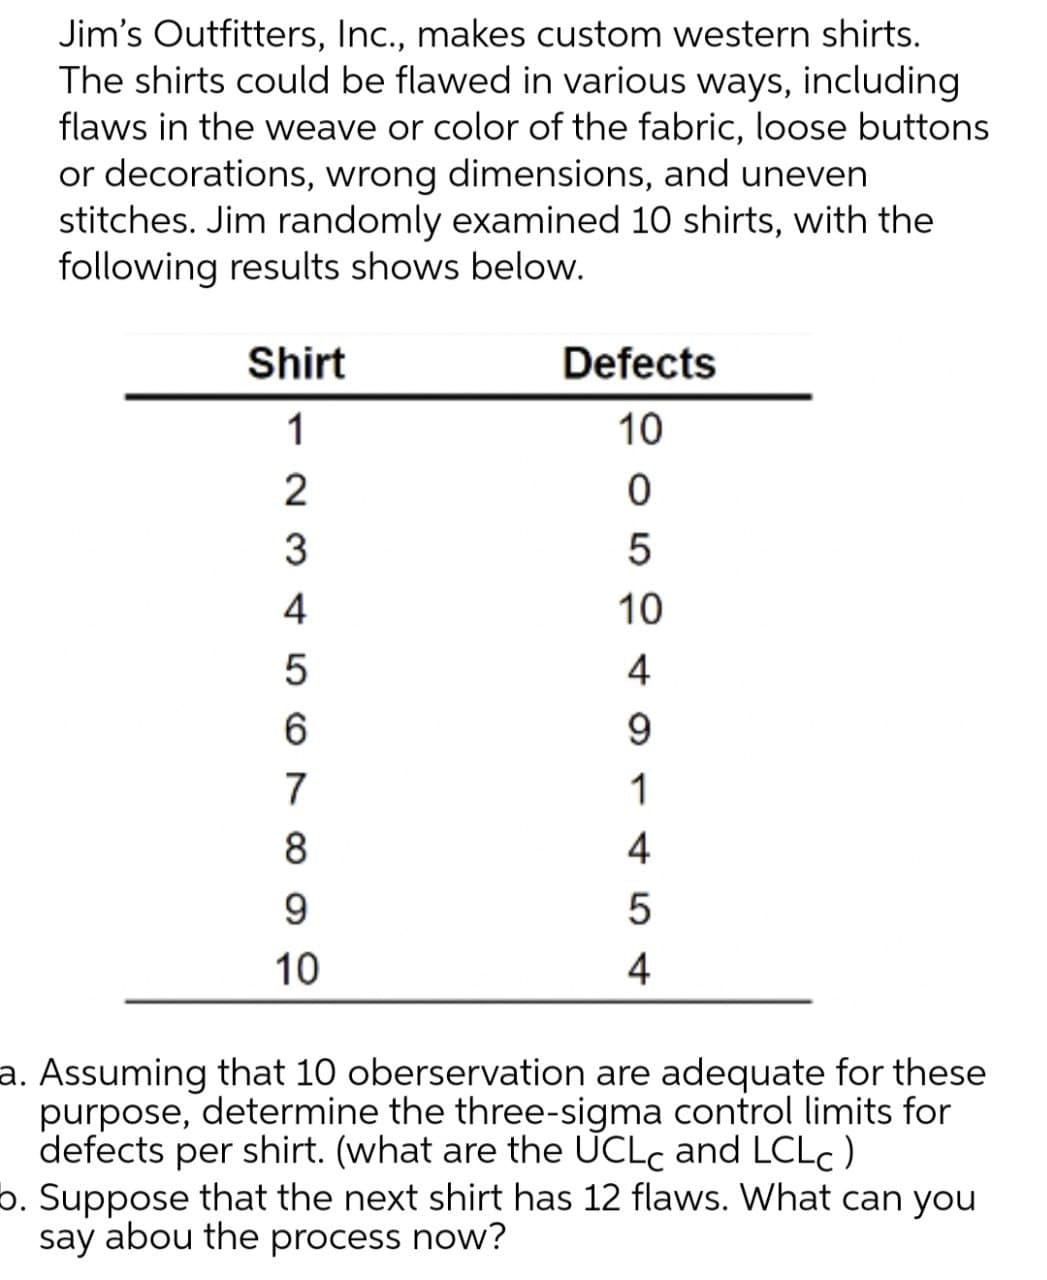 Jim's Outfitters, Inc., makes custom western shirts.
The shirts could be flawed in various ways, including
flaws in the weave or color of the fabric, loose buttons
or decorations, wrong dimensions, and uneven
stitches. Jim randomly examined 10 shirts, with the
following results shows below.
Shirt
1
23456 ∞
7
8
9
10
Defects
10
05
10
4
9
1
4
5
4
a. Assuming that 10 oberservation are adequate for these
purpose, determine the three-sigma control limits for
defects per shirt. (what are the UCLC and LCLC)
b. Suppose that the next shirt has 12 flaws. What can you
say abou the process now?